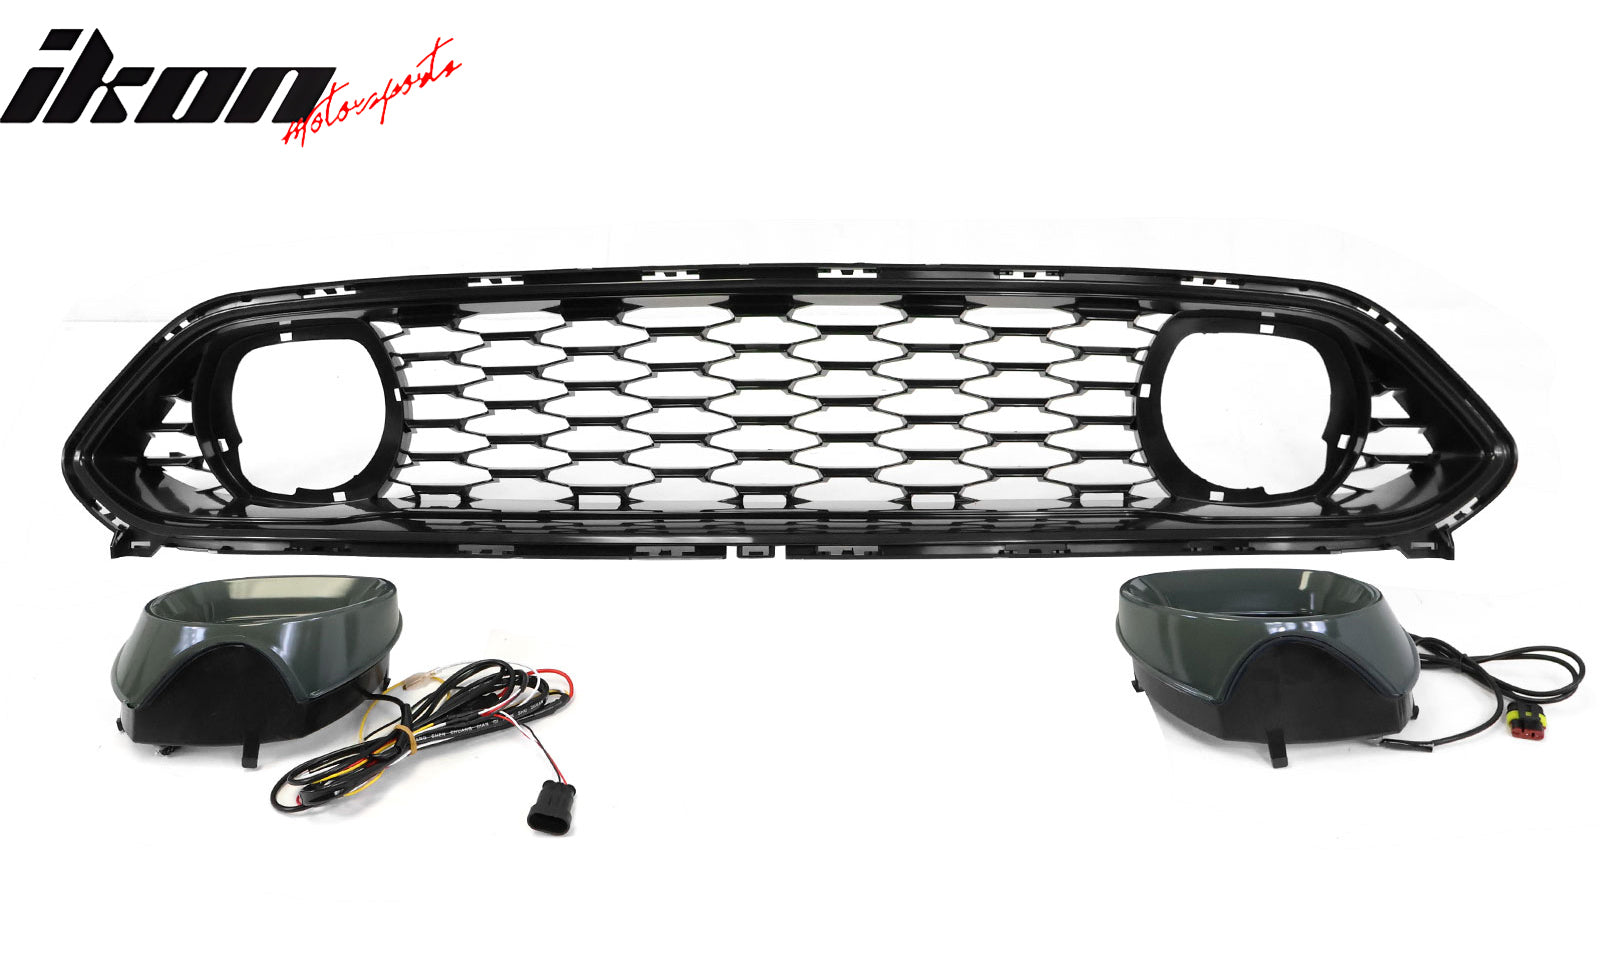 IKON MOTORSPORTS, Front Upper Grille W/ Lamp Compatible With 2021